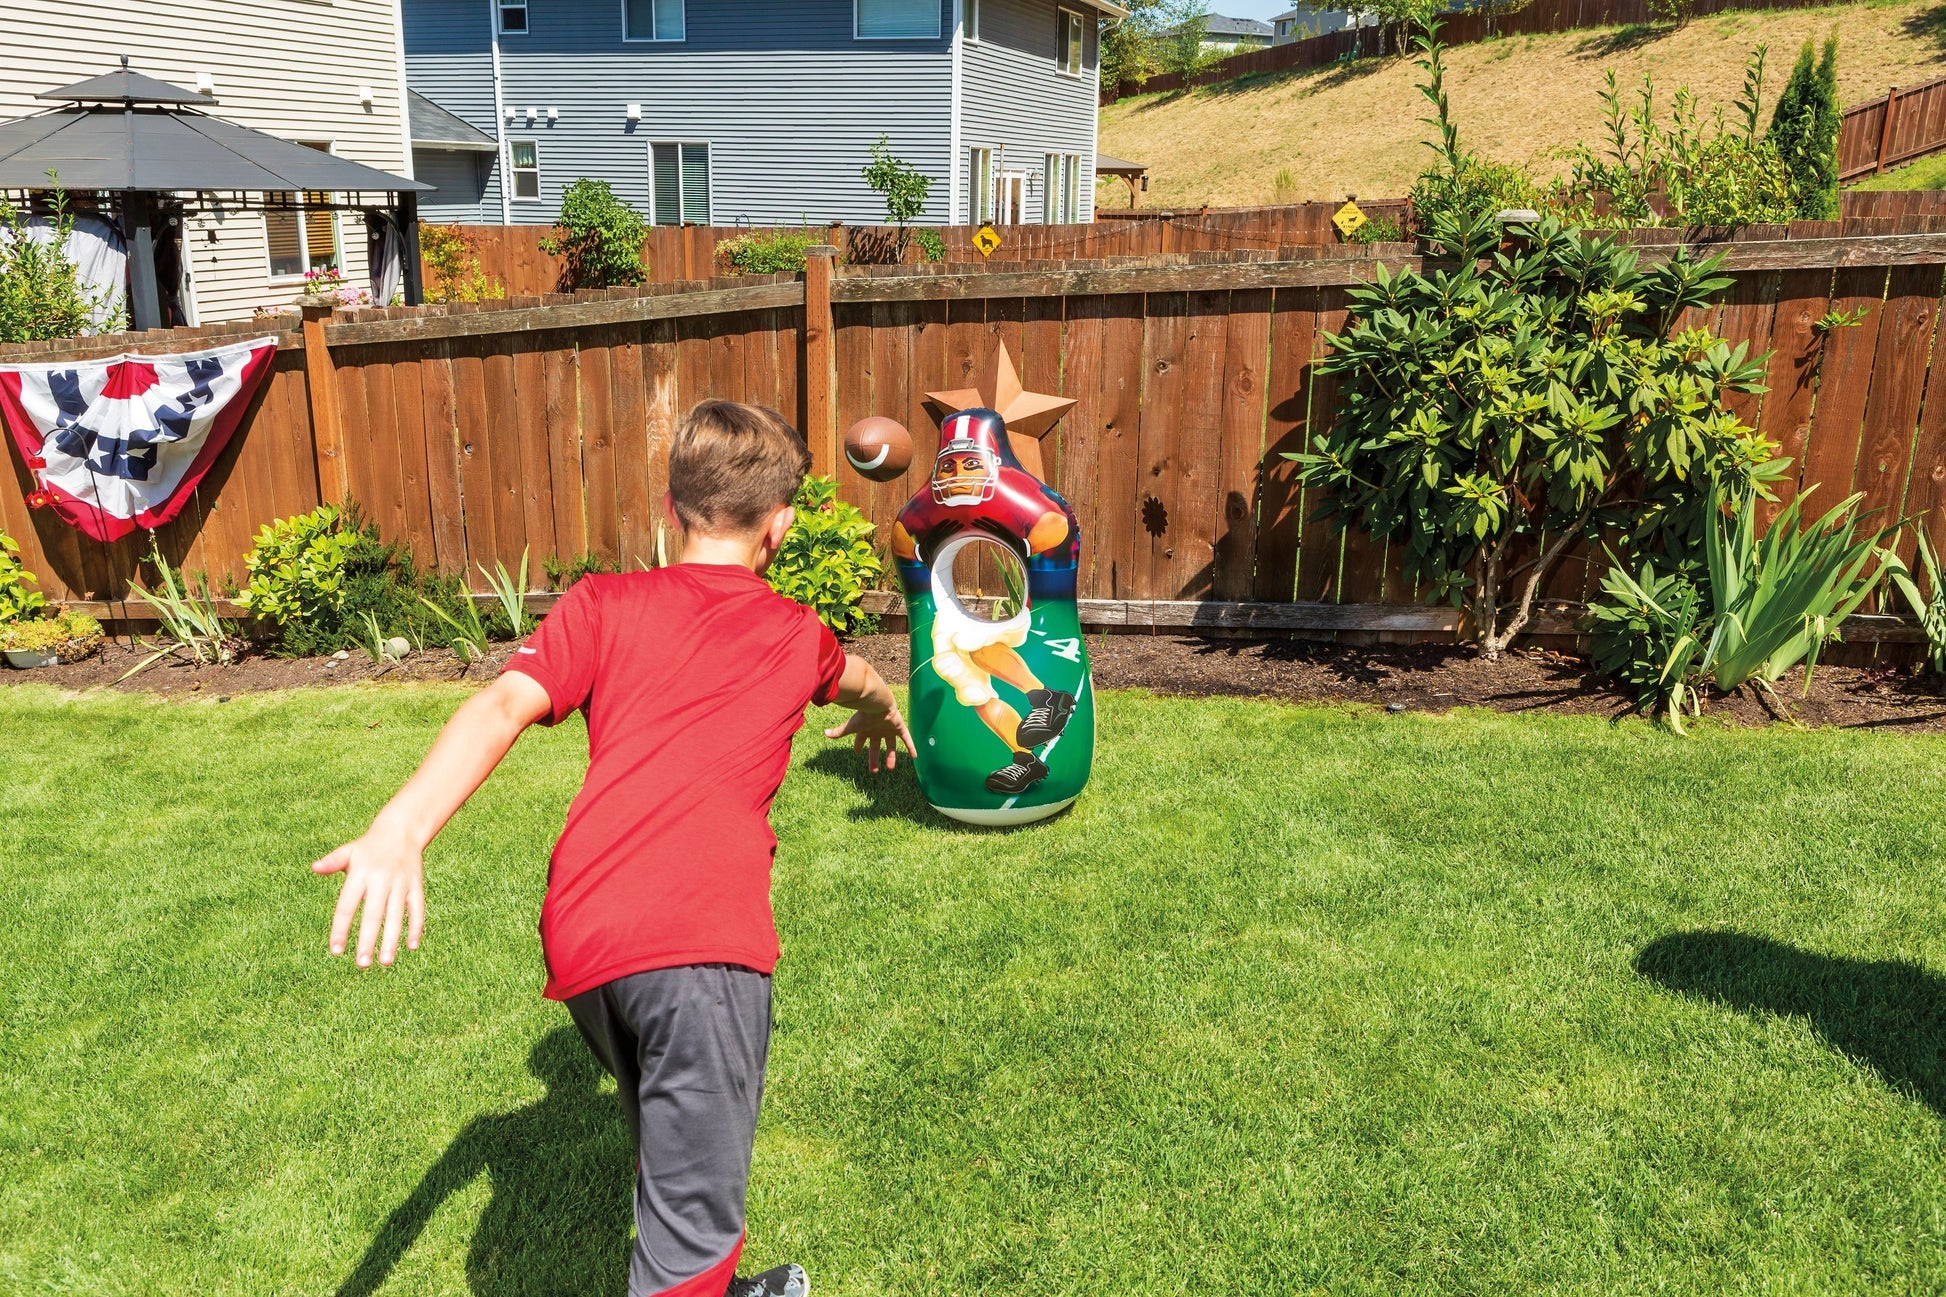 Inflatable Toss - Baseball and Football Target Practice